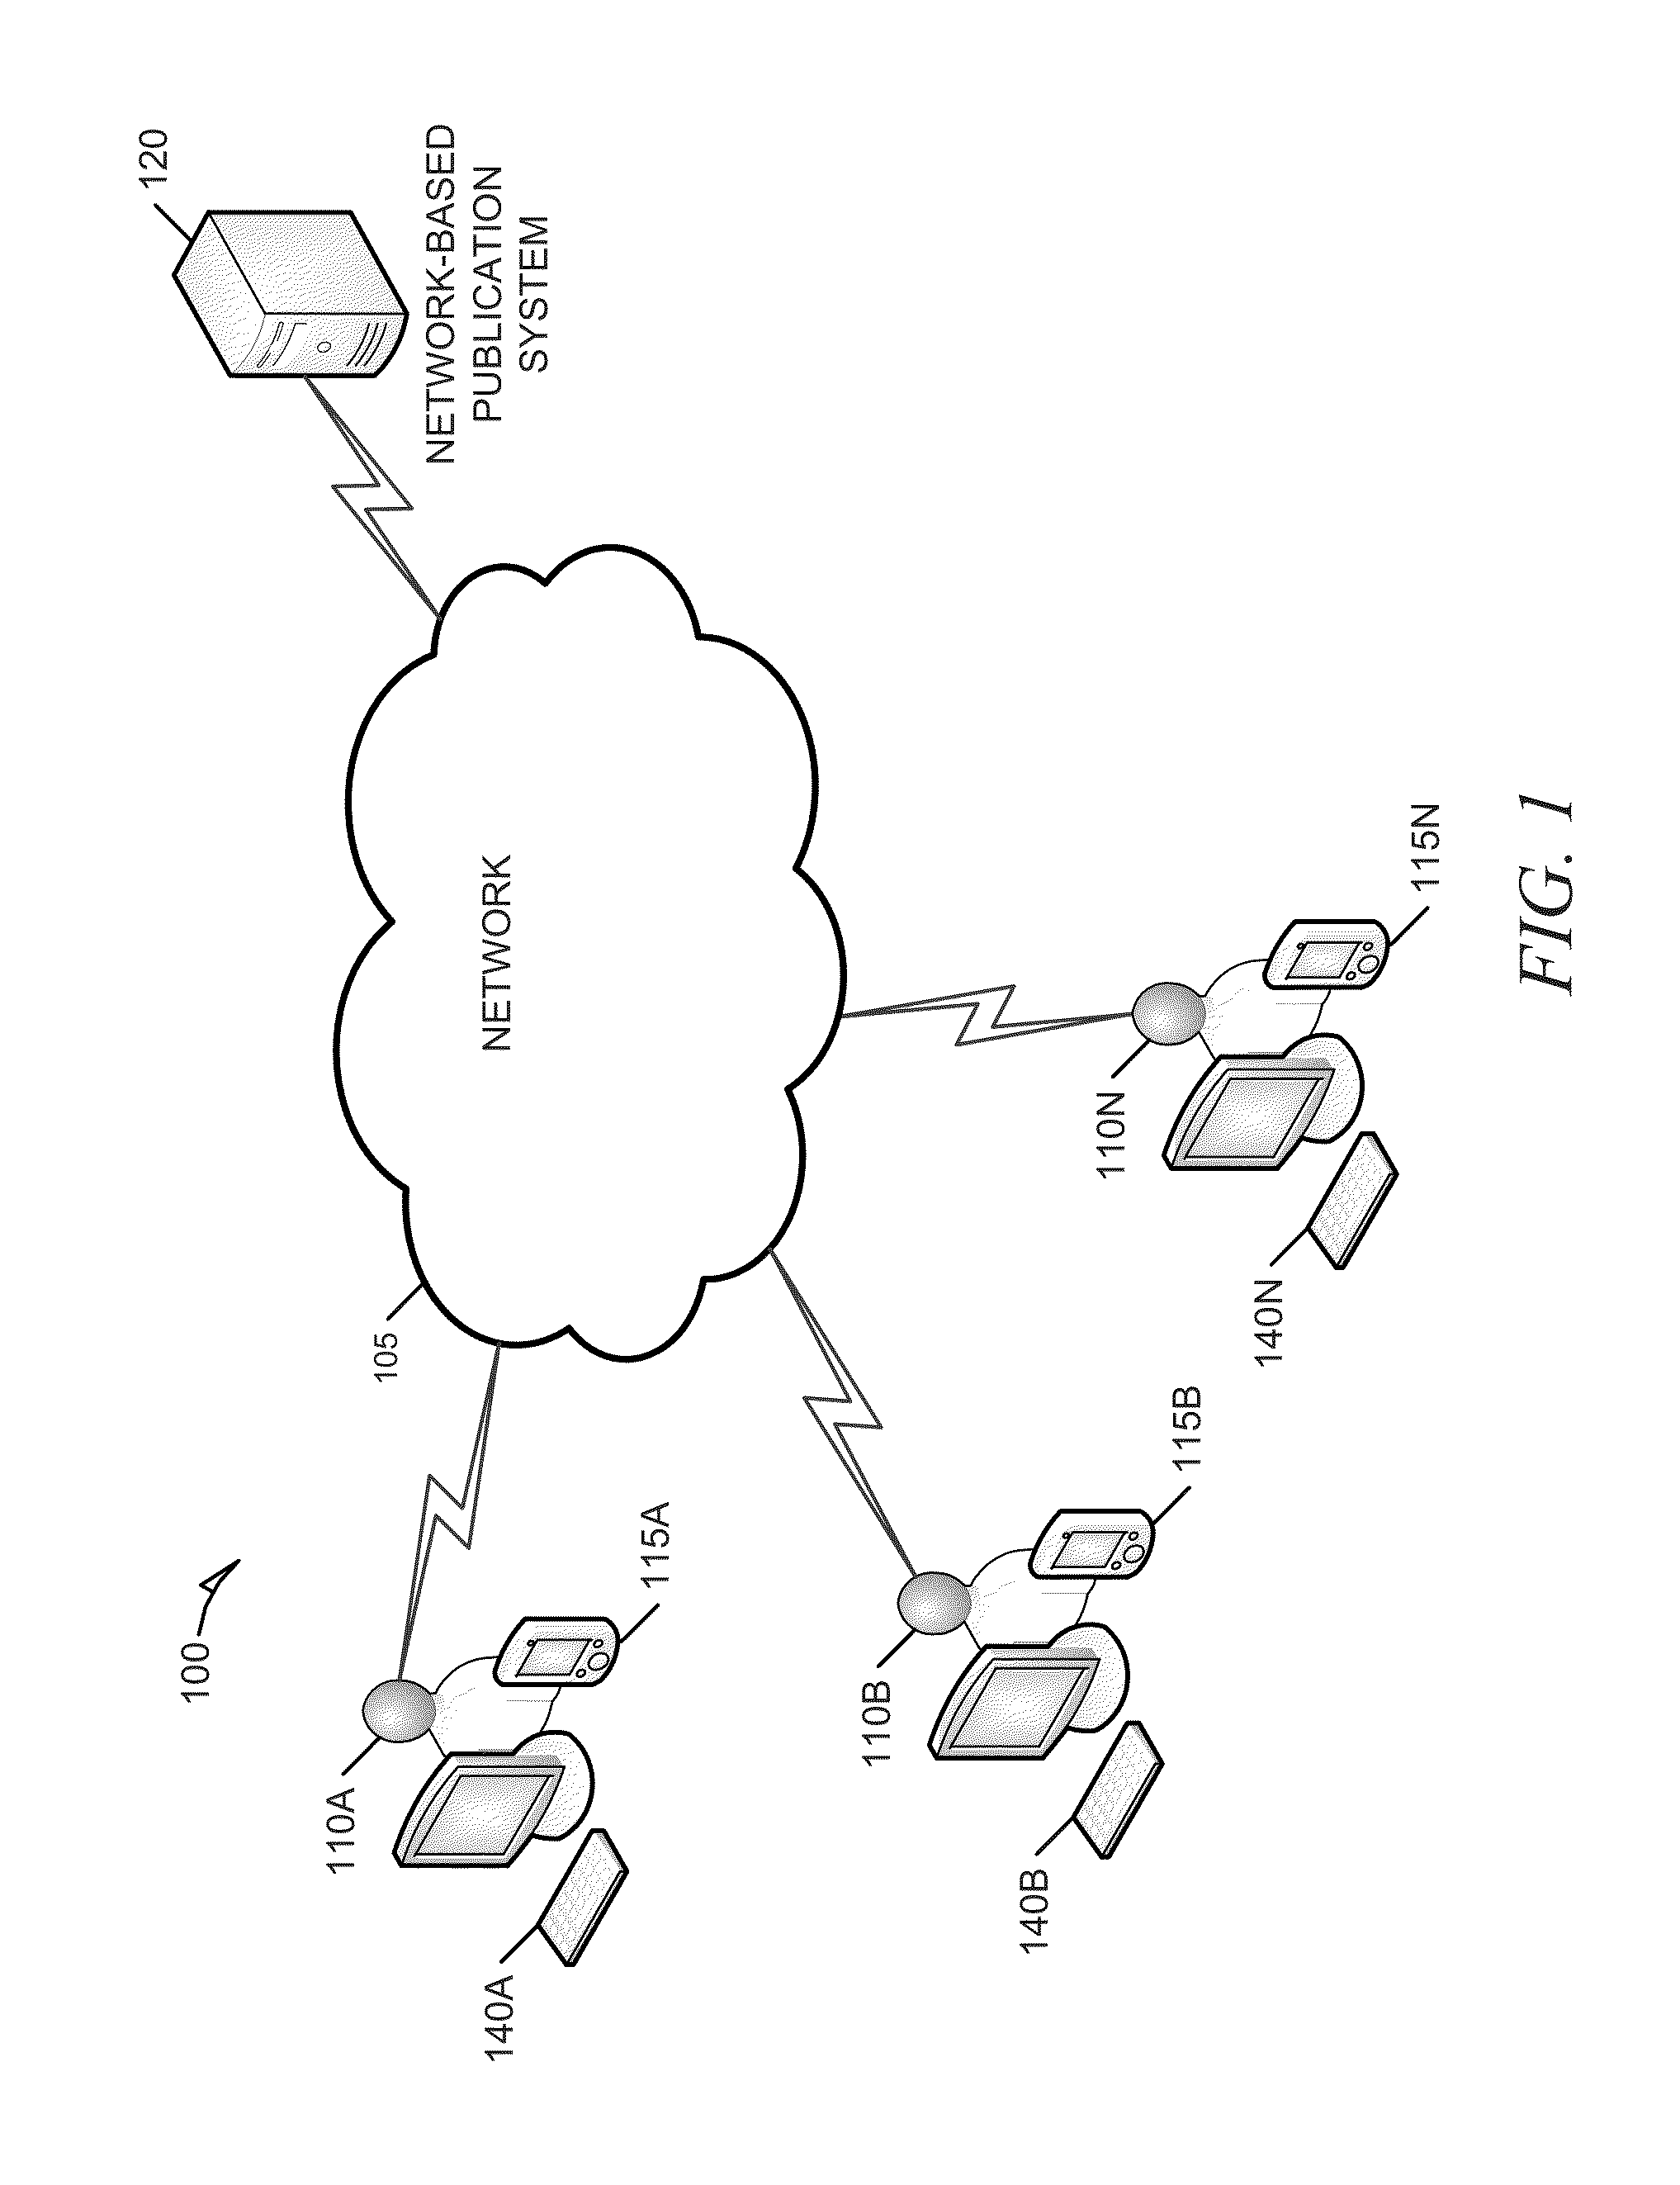 Systems and method for configuring mobile device applicatoins based on location